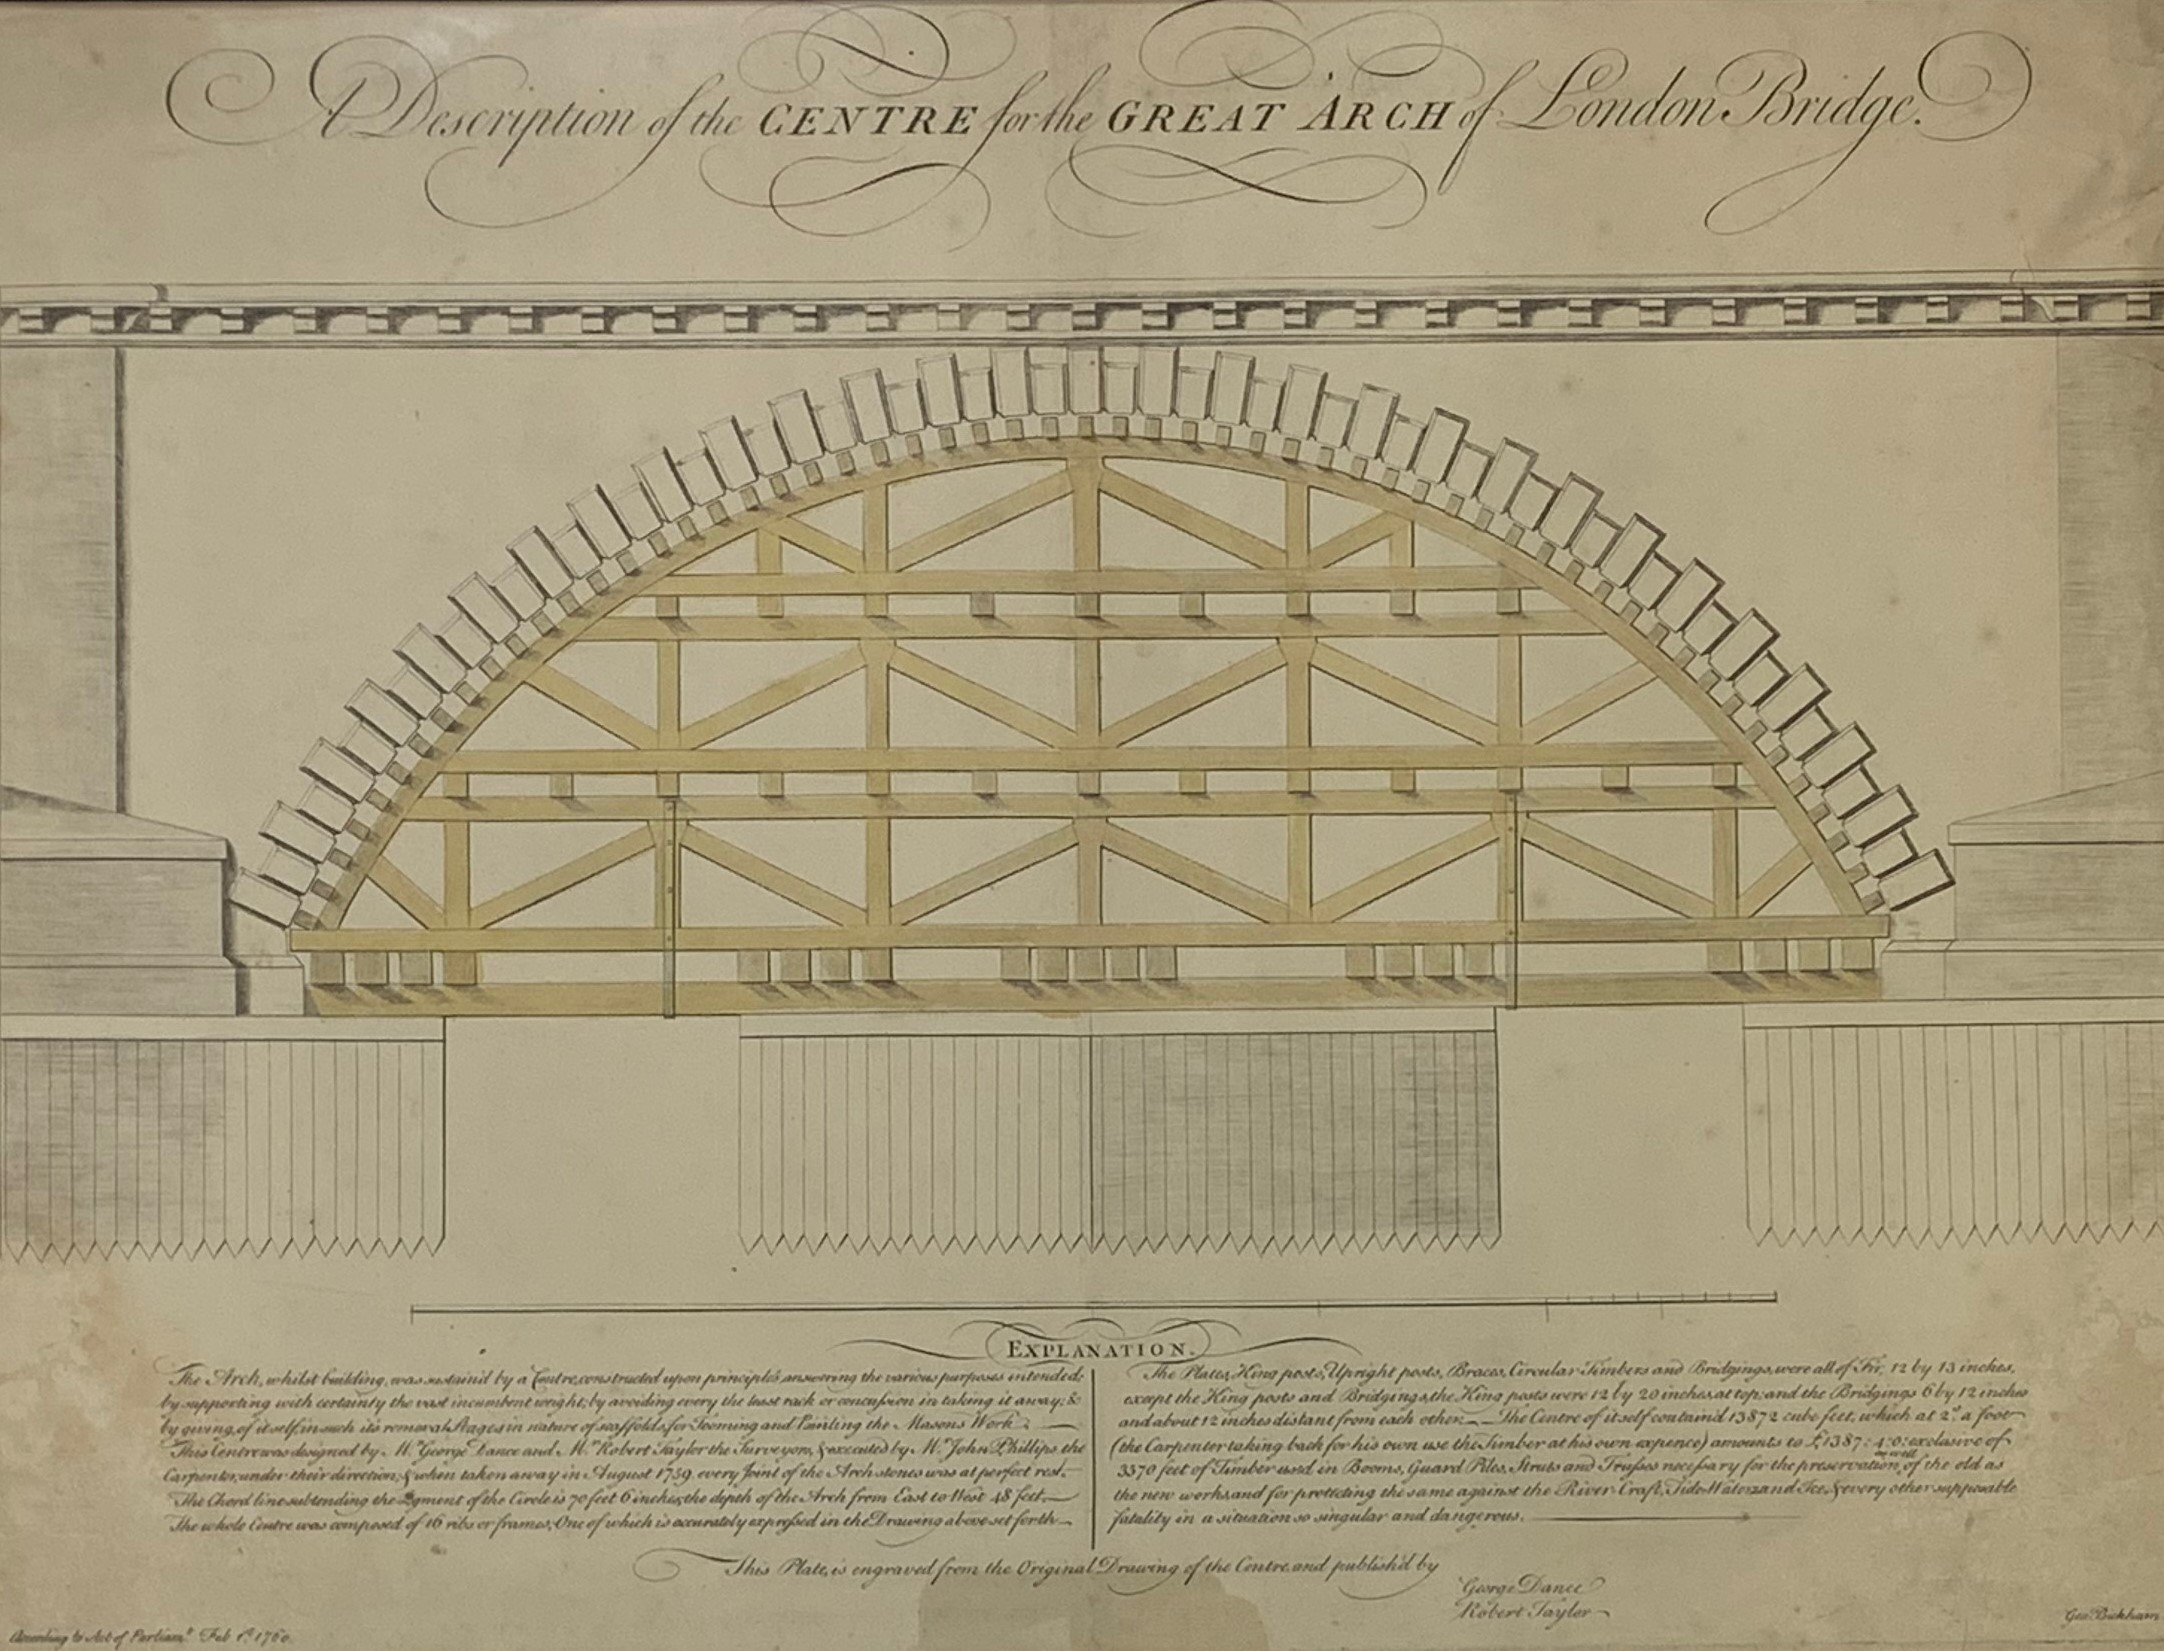 George Bickham the younger (1776-1771) 'Description of the Centre for the great Arch of London